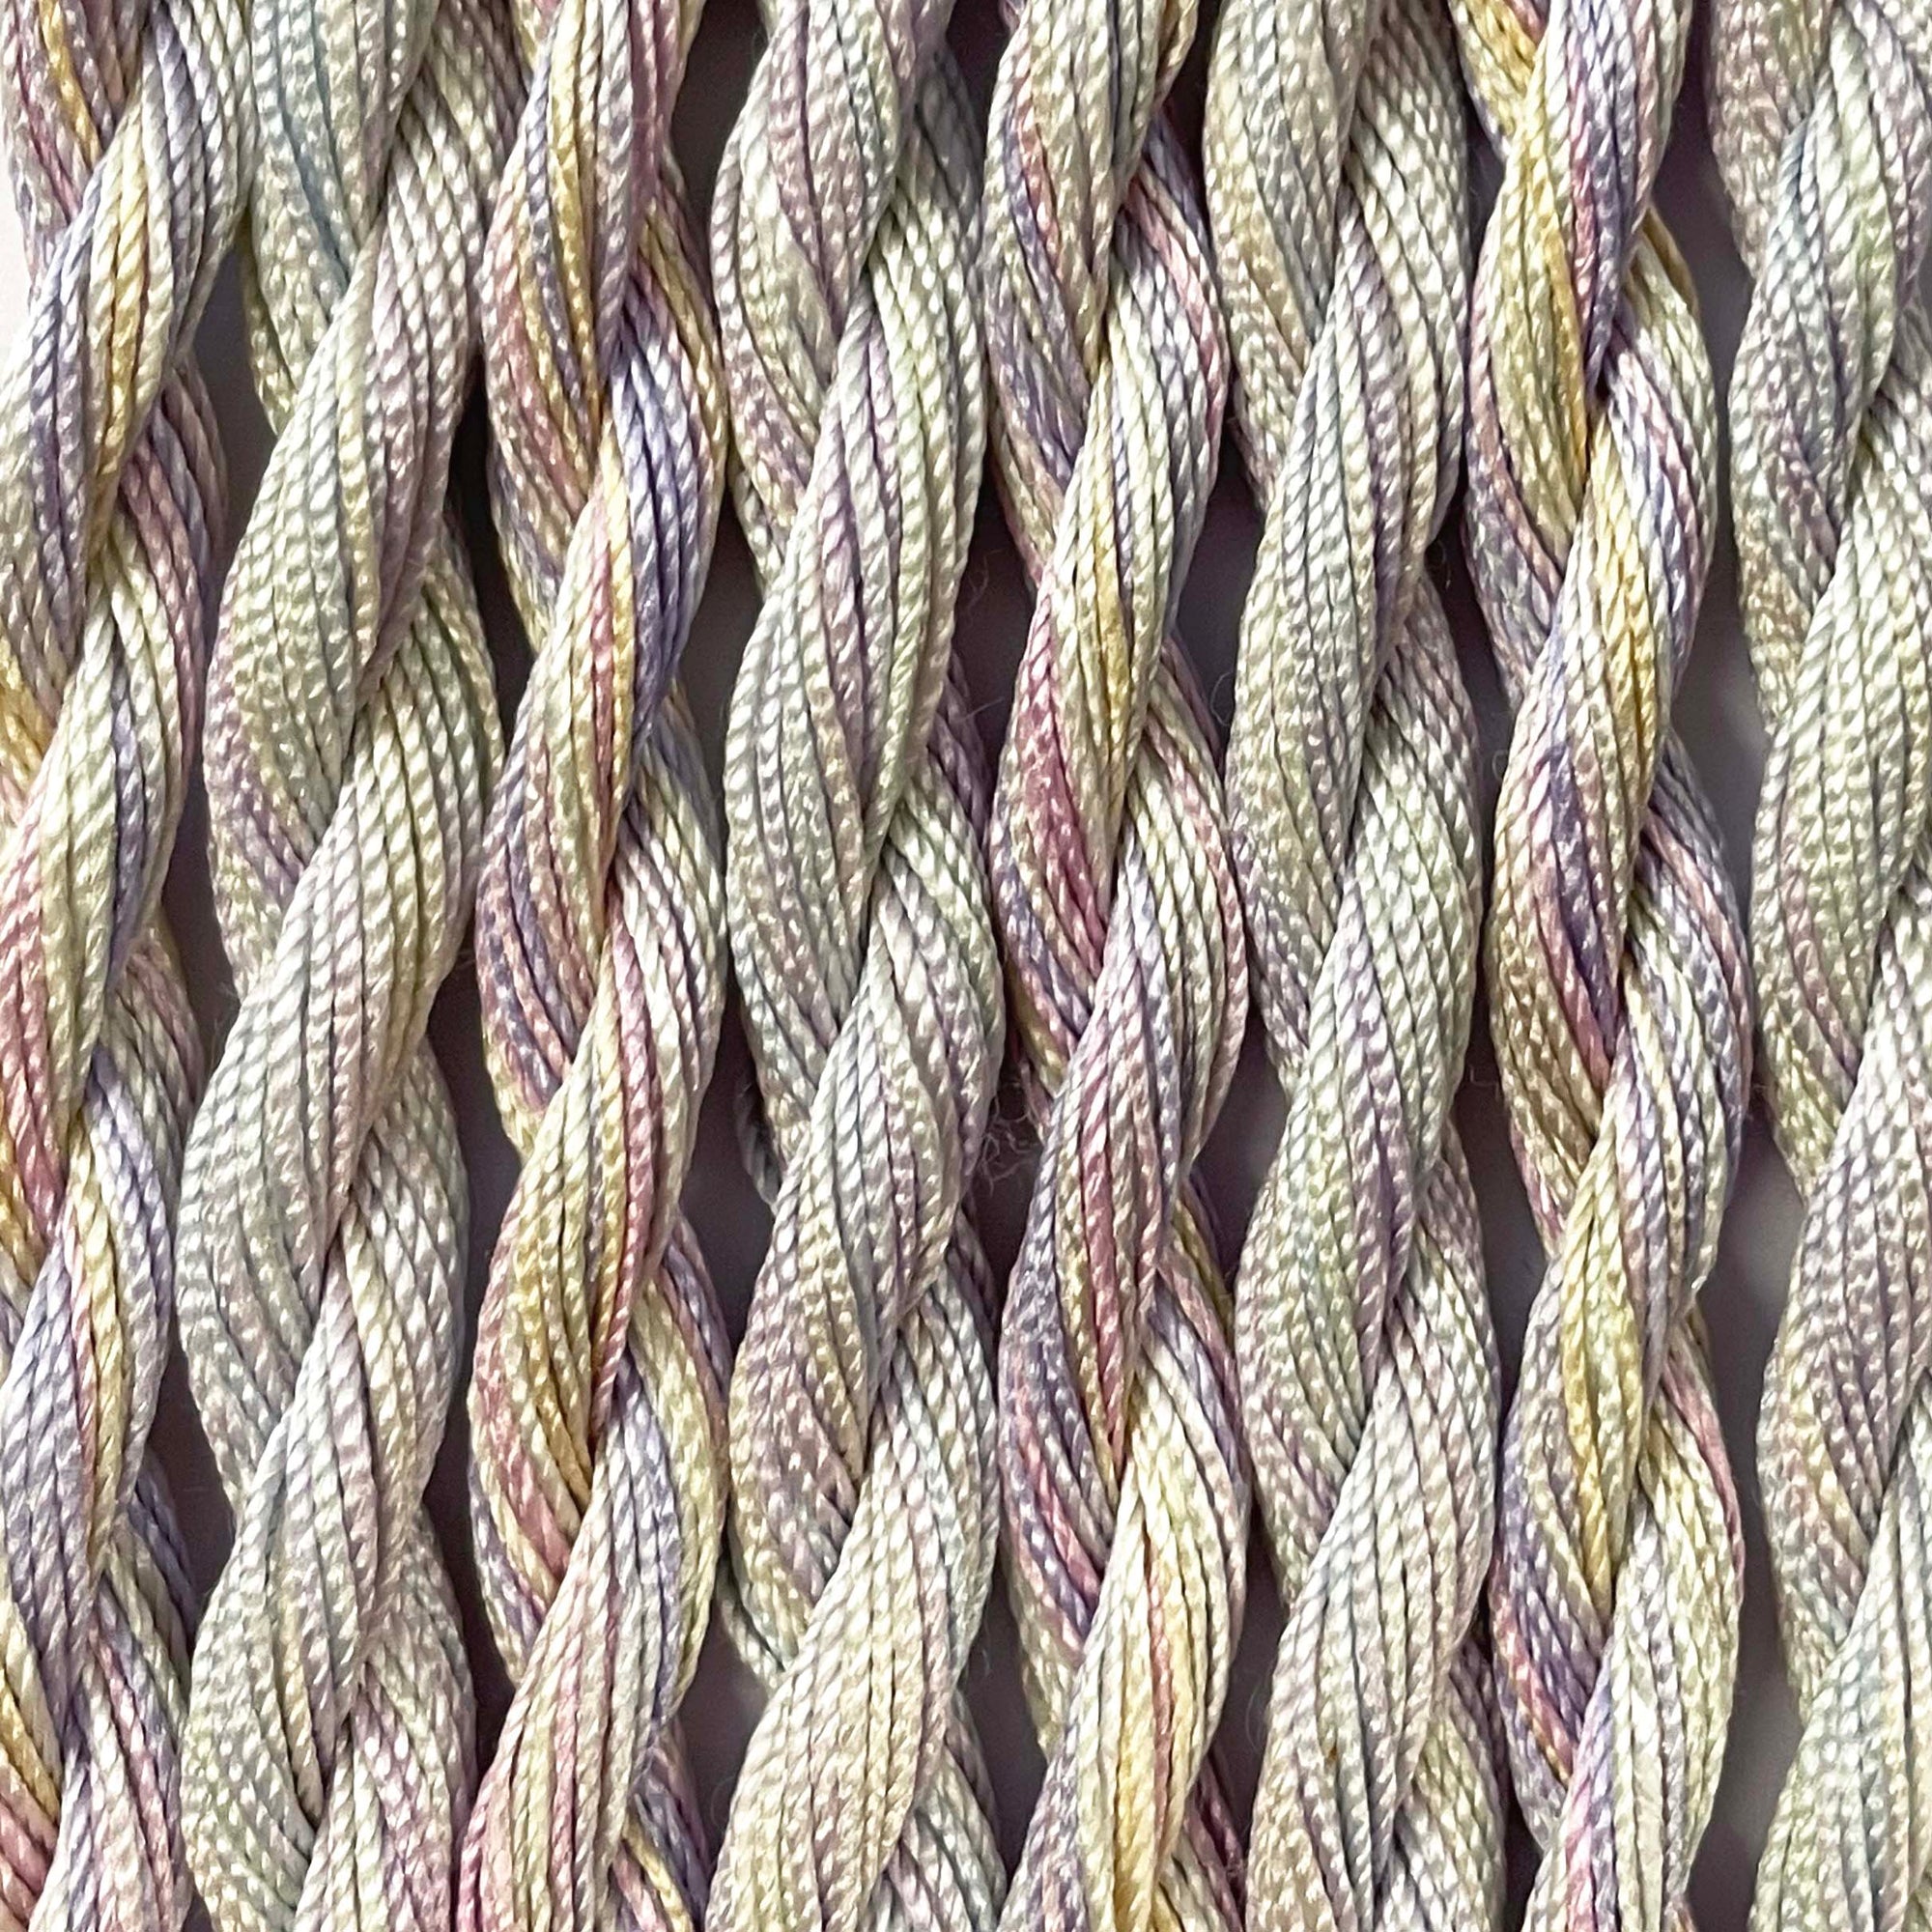 www.colourstreams.com.au Colour Streams Hand Dyed Silk Threads Silken Strands Ophir Exotic Lights Aurora Slow Stitch Embroidery Textile Arts Fibre DL 41 Hydrangea Mauves Yellows Purples Blues